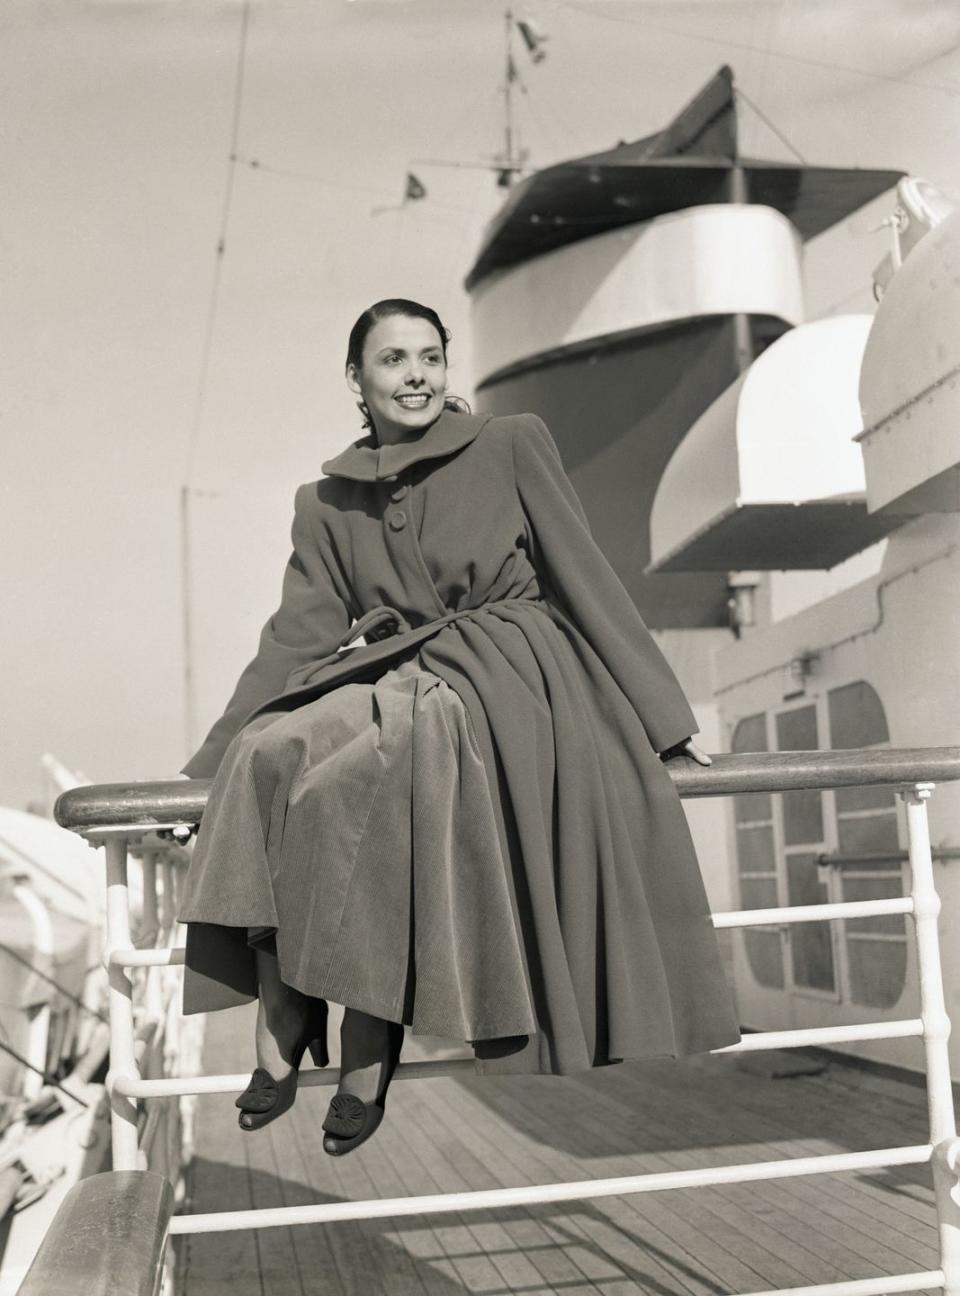 <p>After headlining shows in London and Paris, singer Lena Horne sets sail on the SS America. The singer was bound for New York City dressed in a velvet skirt and overcoat. </p>